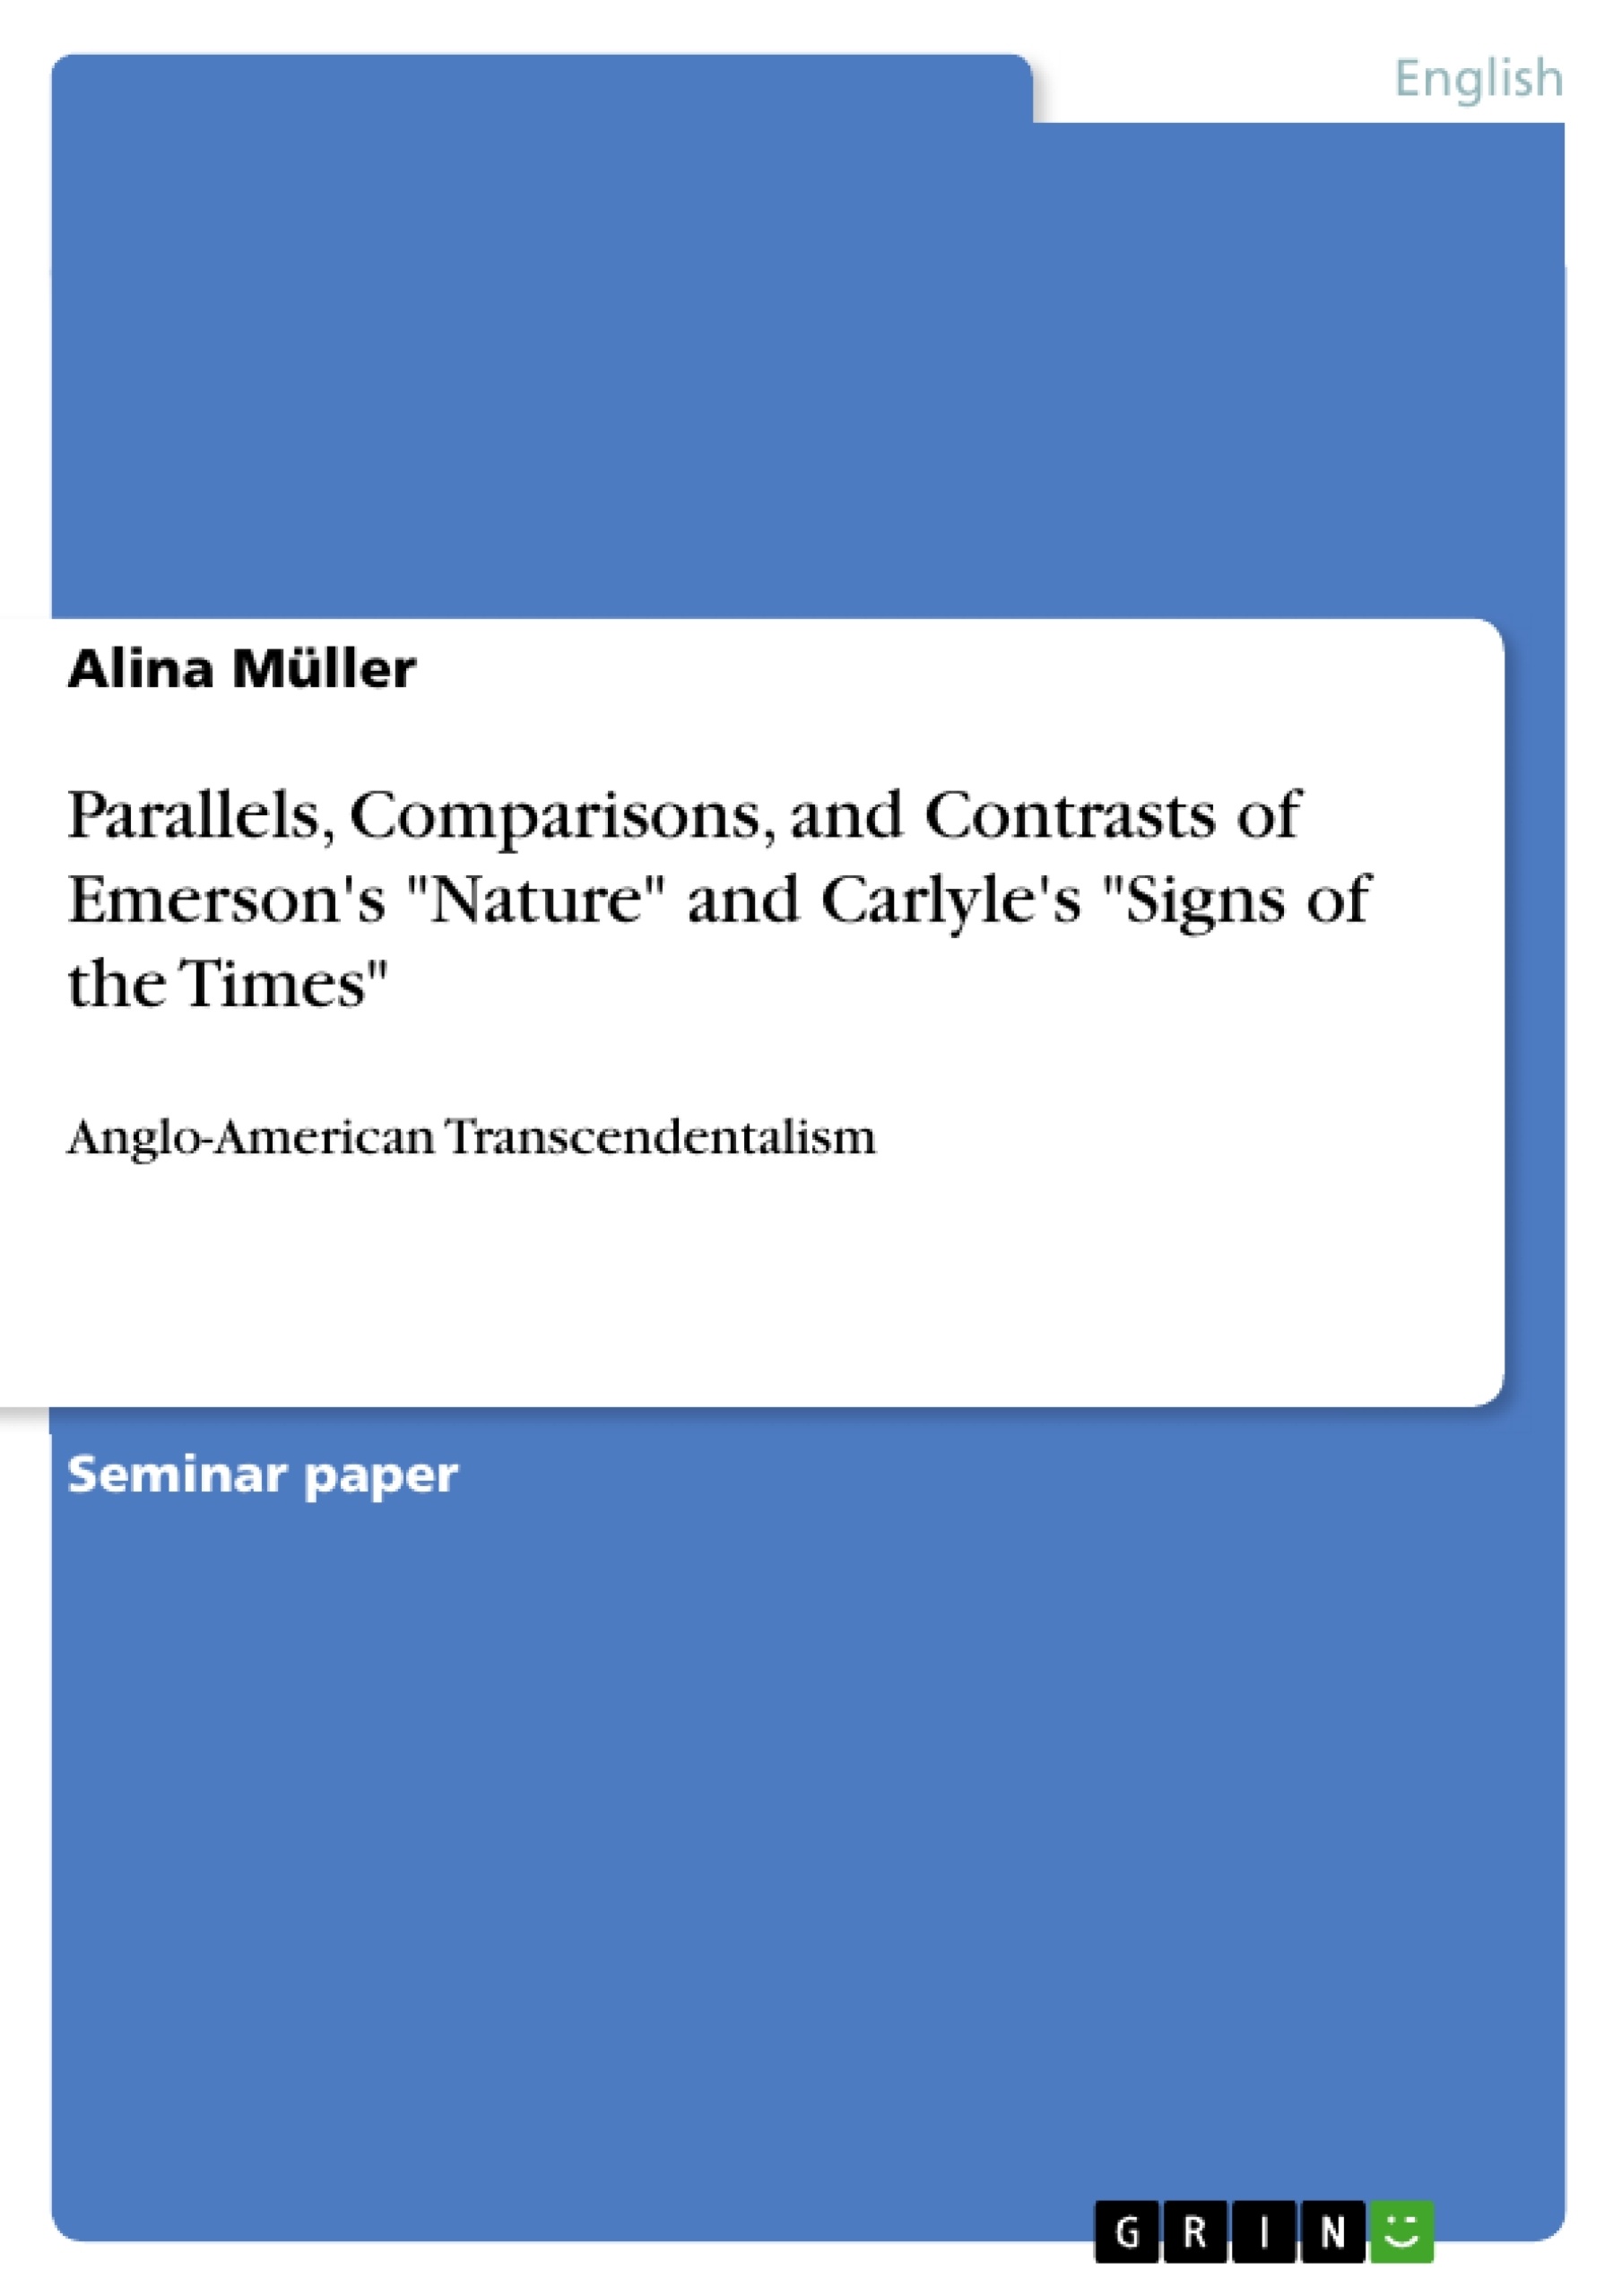 Title: Parallels, Comparisons, and Contrasts of Emerson's "Nature" and Carlyle's "Signs of the Times"